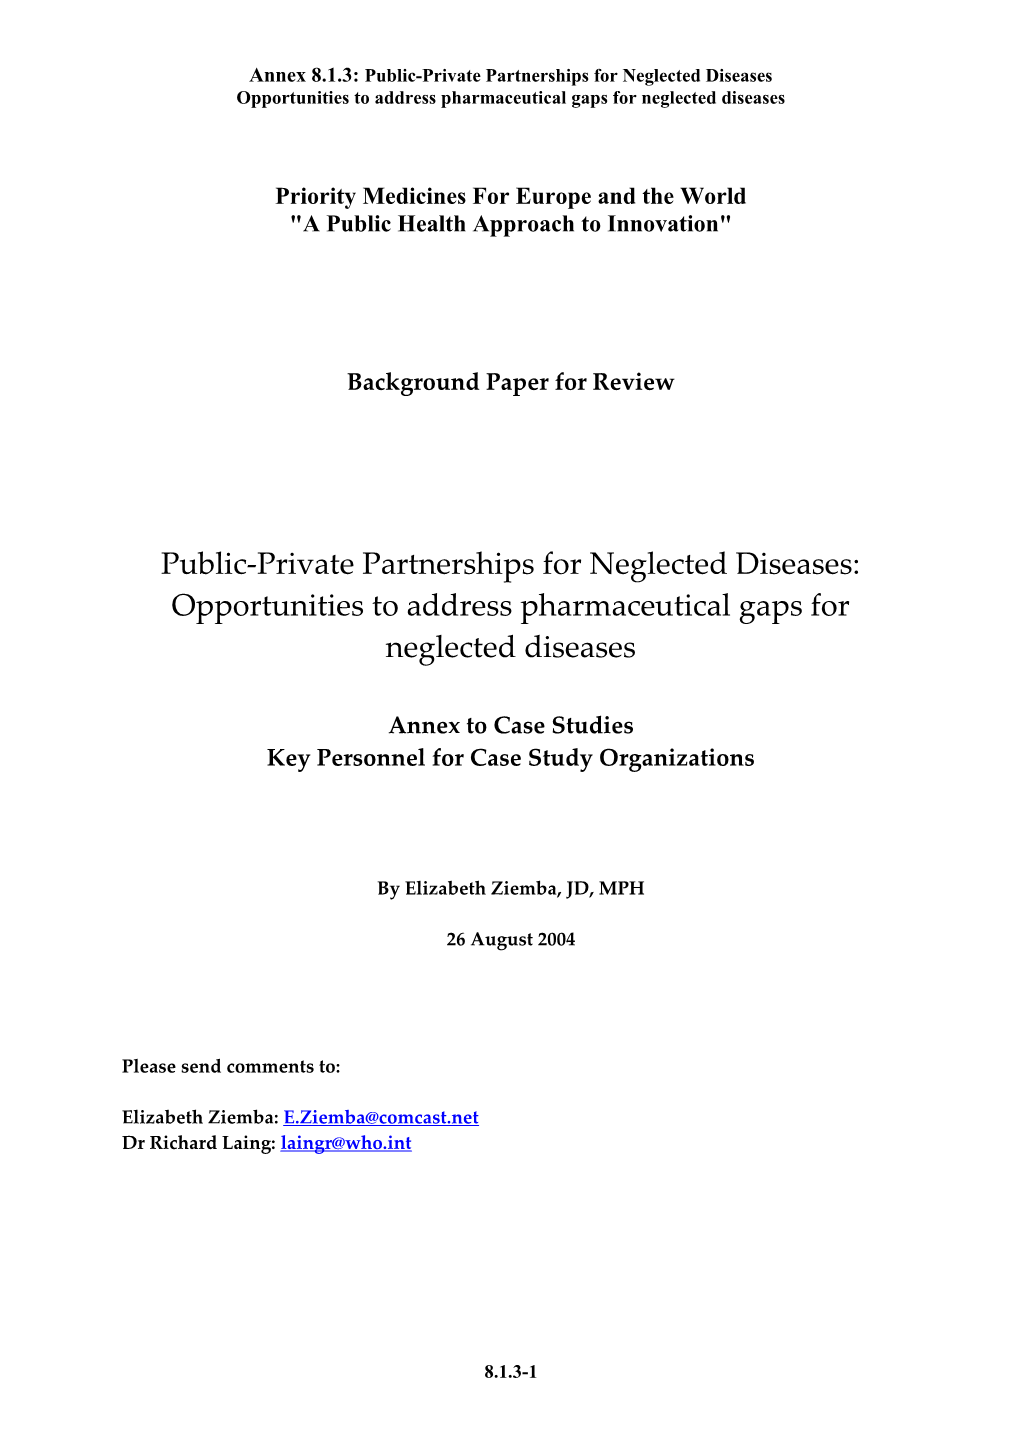 Annex 8.1.3: Public-Private Partnerships for Neglected Diseases